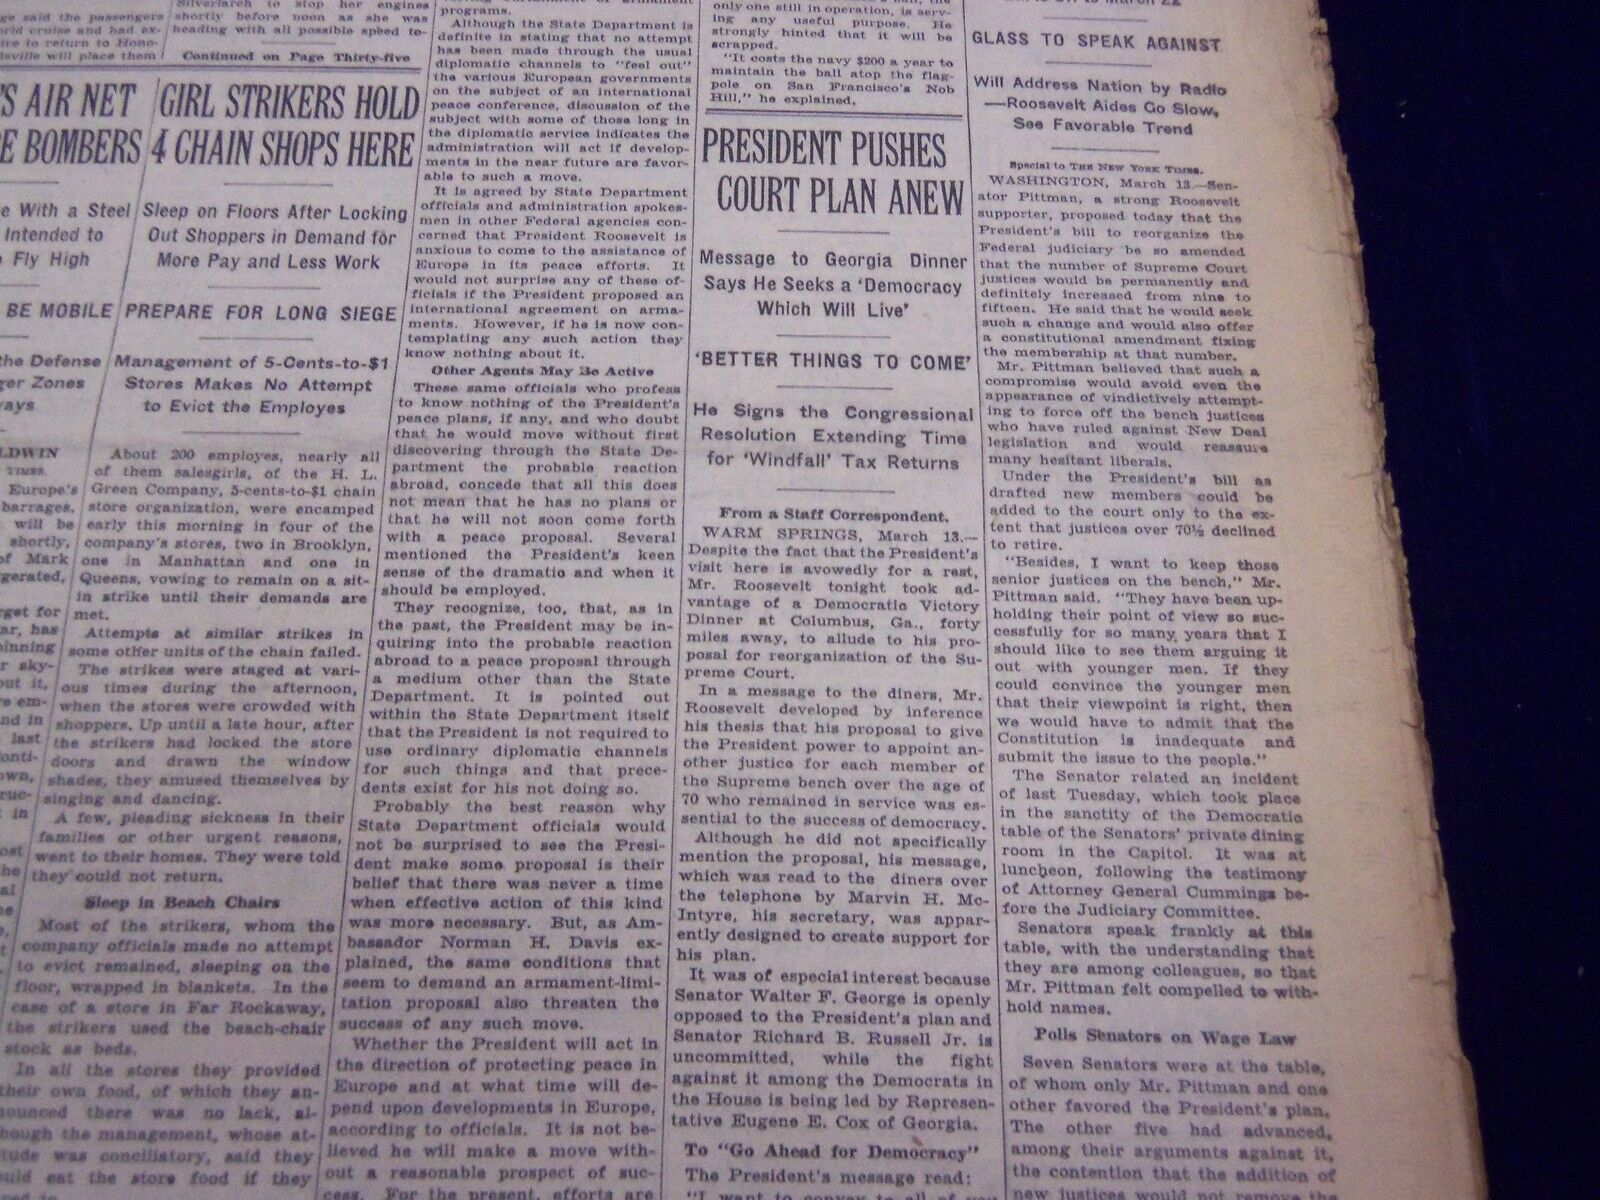 1937 MARCH 14 NEW YORK TIMES - PRESIDENT AGAIN PUSHES COURT PLAN - NT 3403